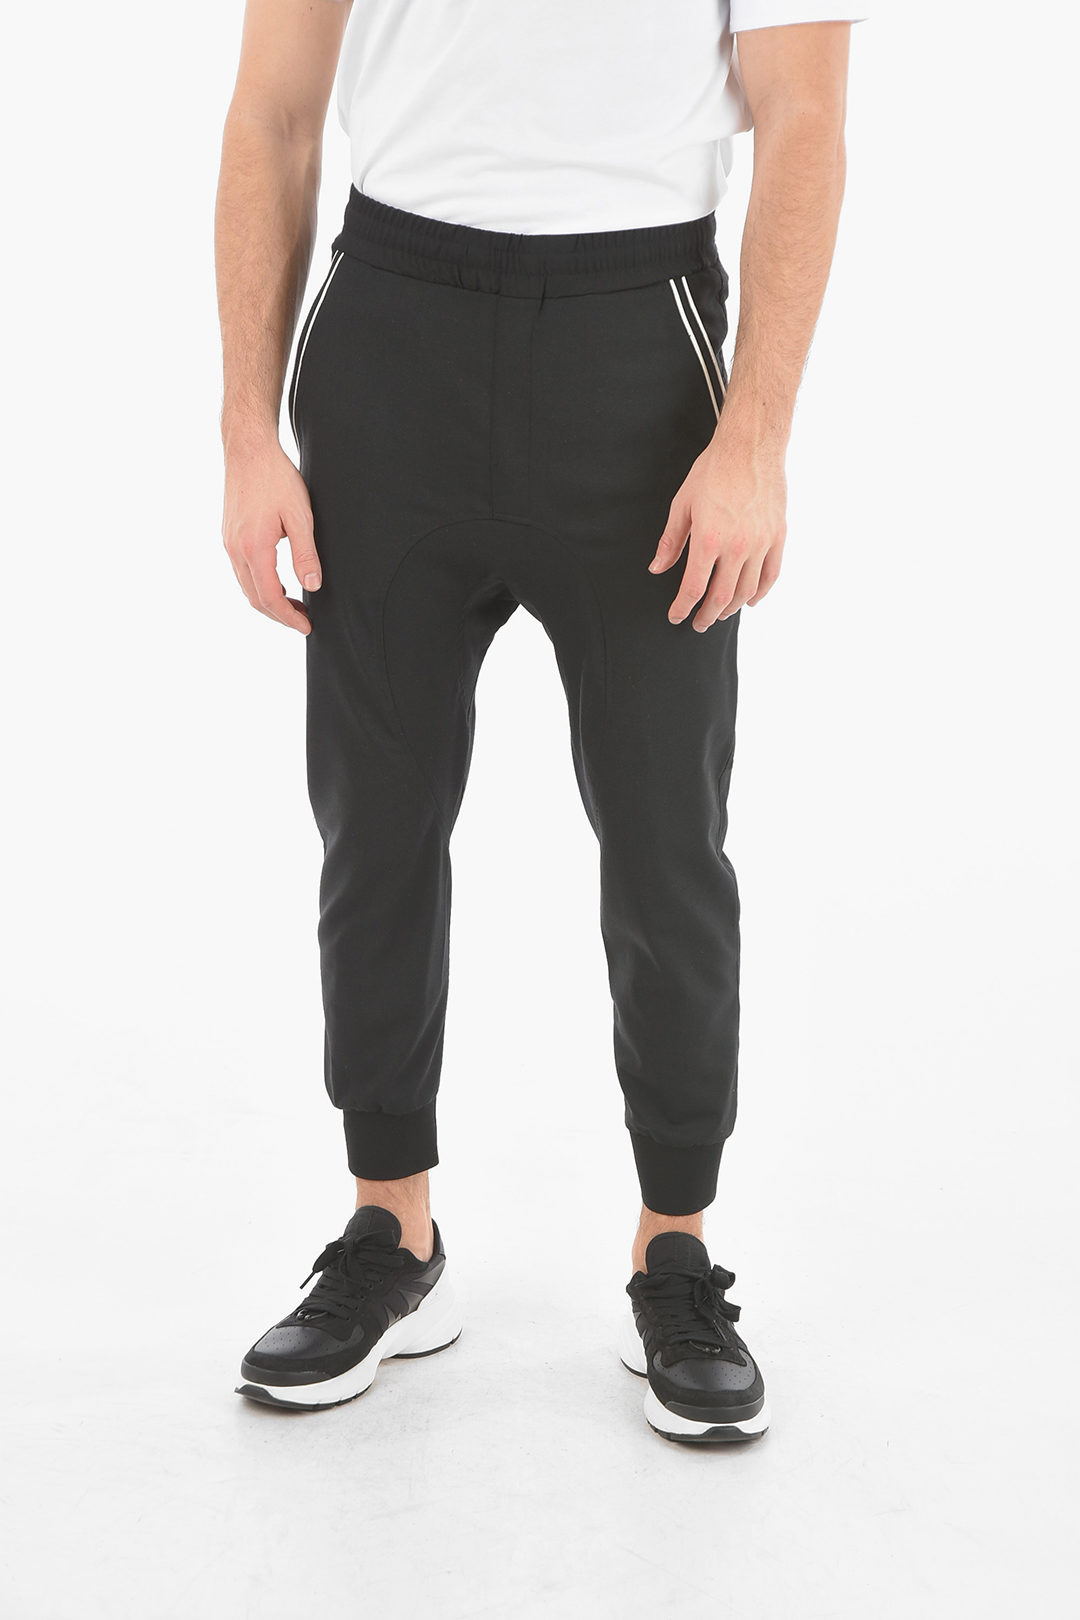 Neil Barrett Low-Rise SLOUCH FIT Contrasting Band Pants men - Glamood ...